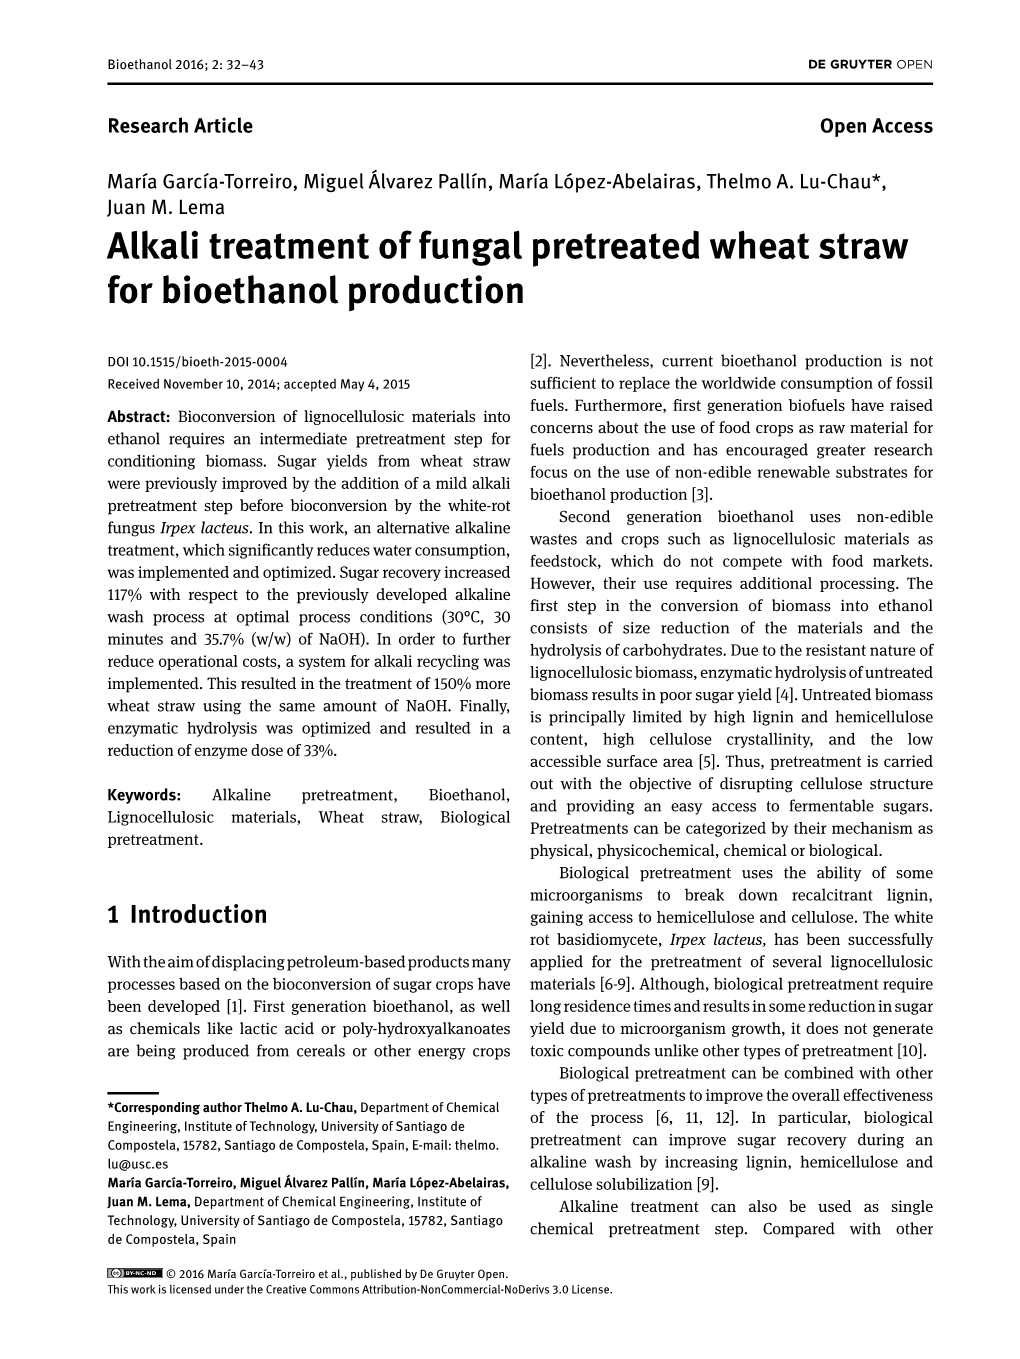 Alkali Treatment of Fungal Pretreated Wheat Straw for Bioethanol Production